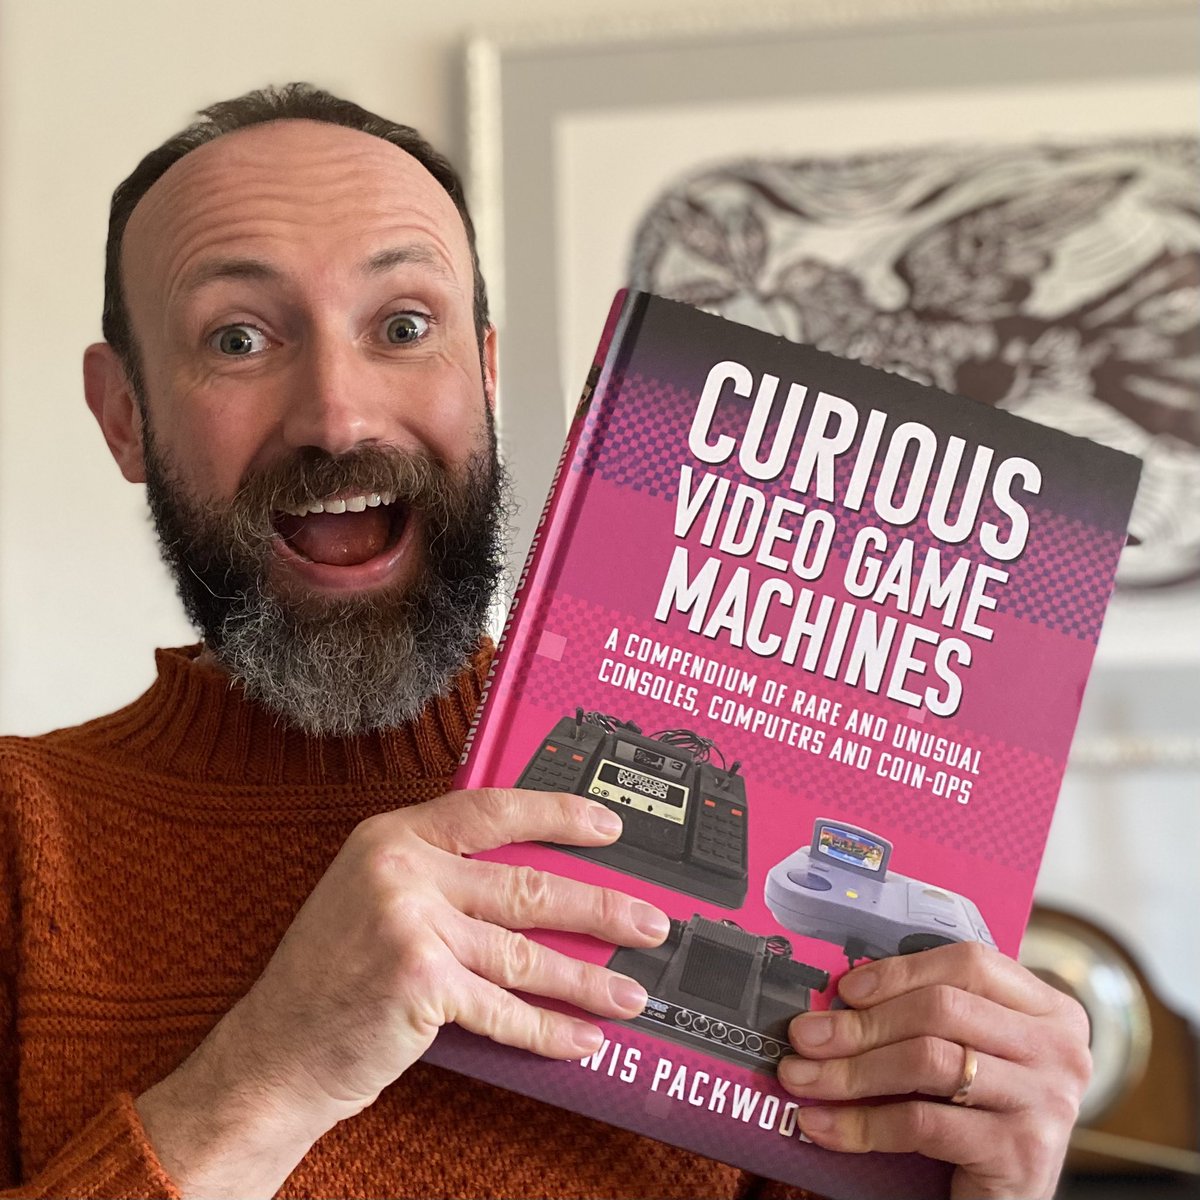 CURIOUS VIDEO GAME MACHINES IS OUT NOW! You can order it from @WhiteOwlBooks at pen-and-sword.co.uk/Curious-Video-… Follow the thread for a few highlights 👇